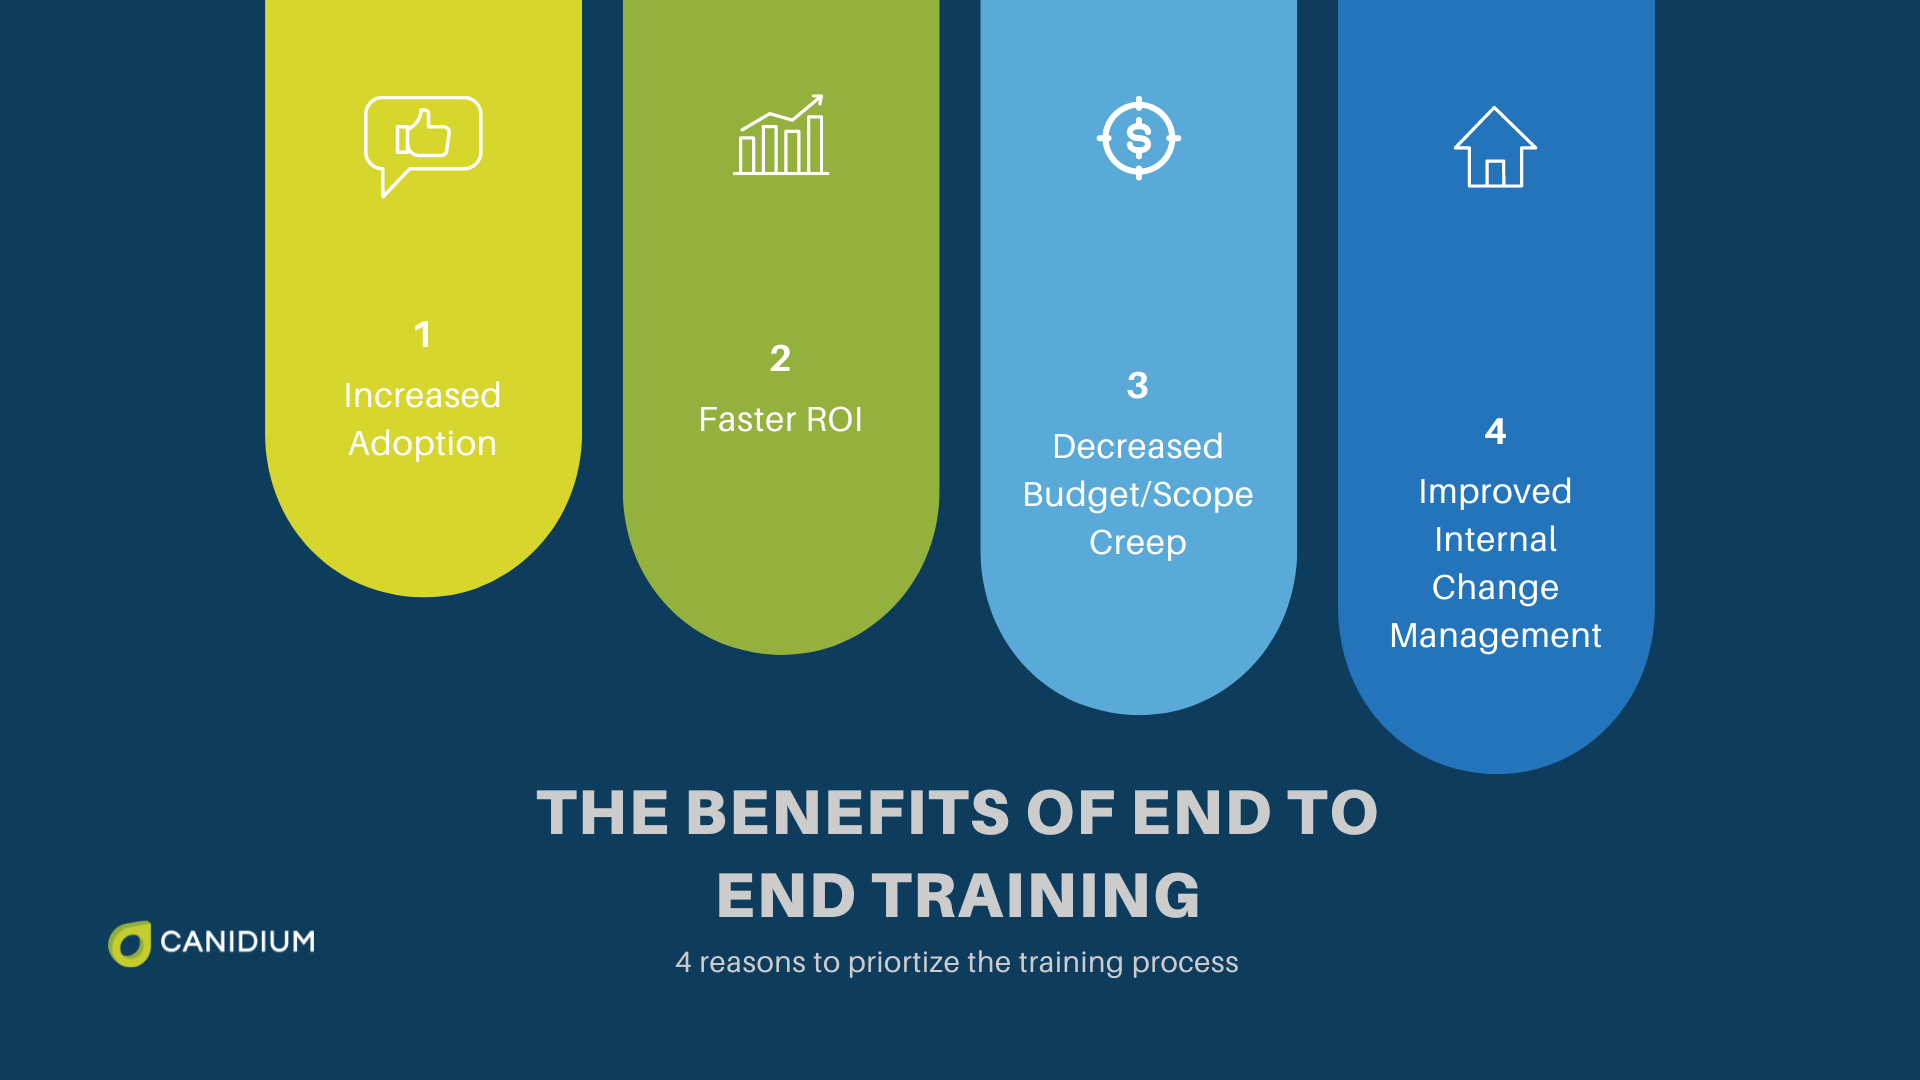 The benefits of end-to-end training